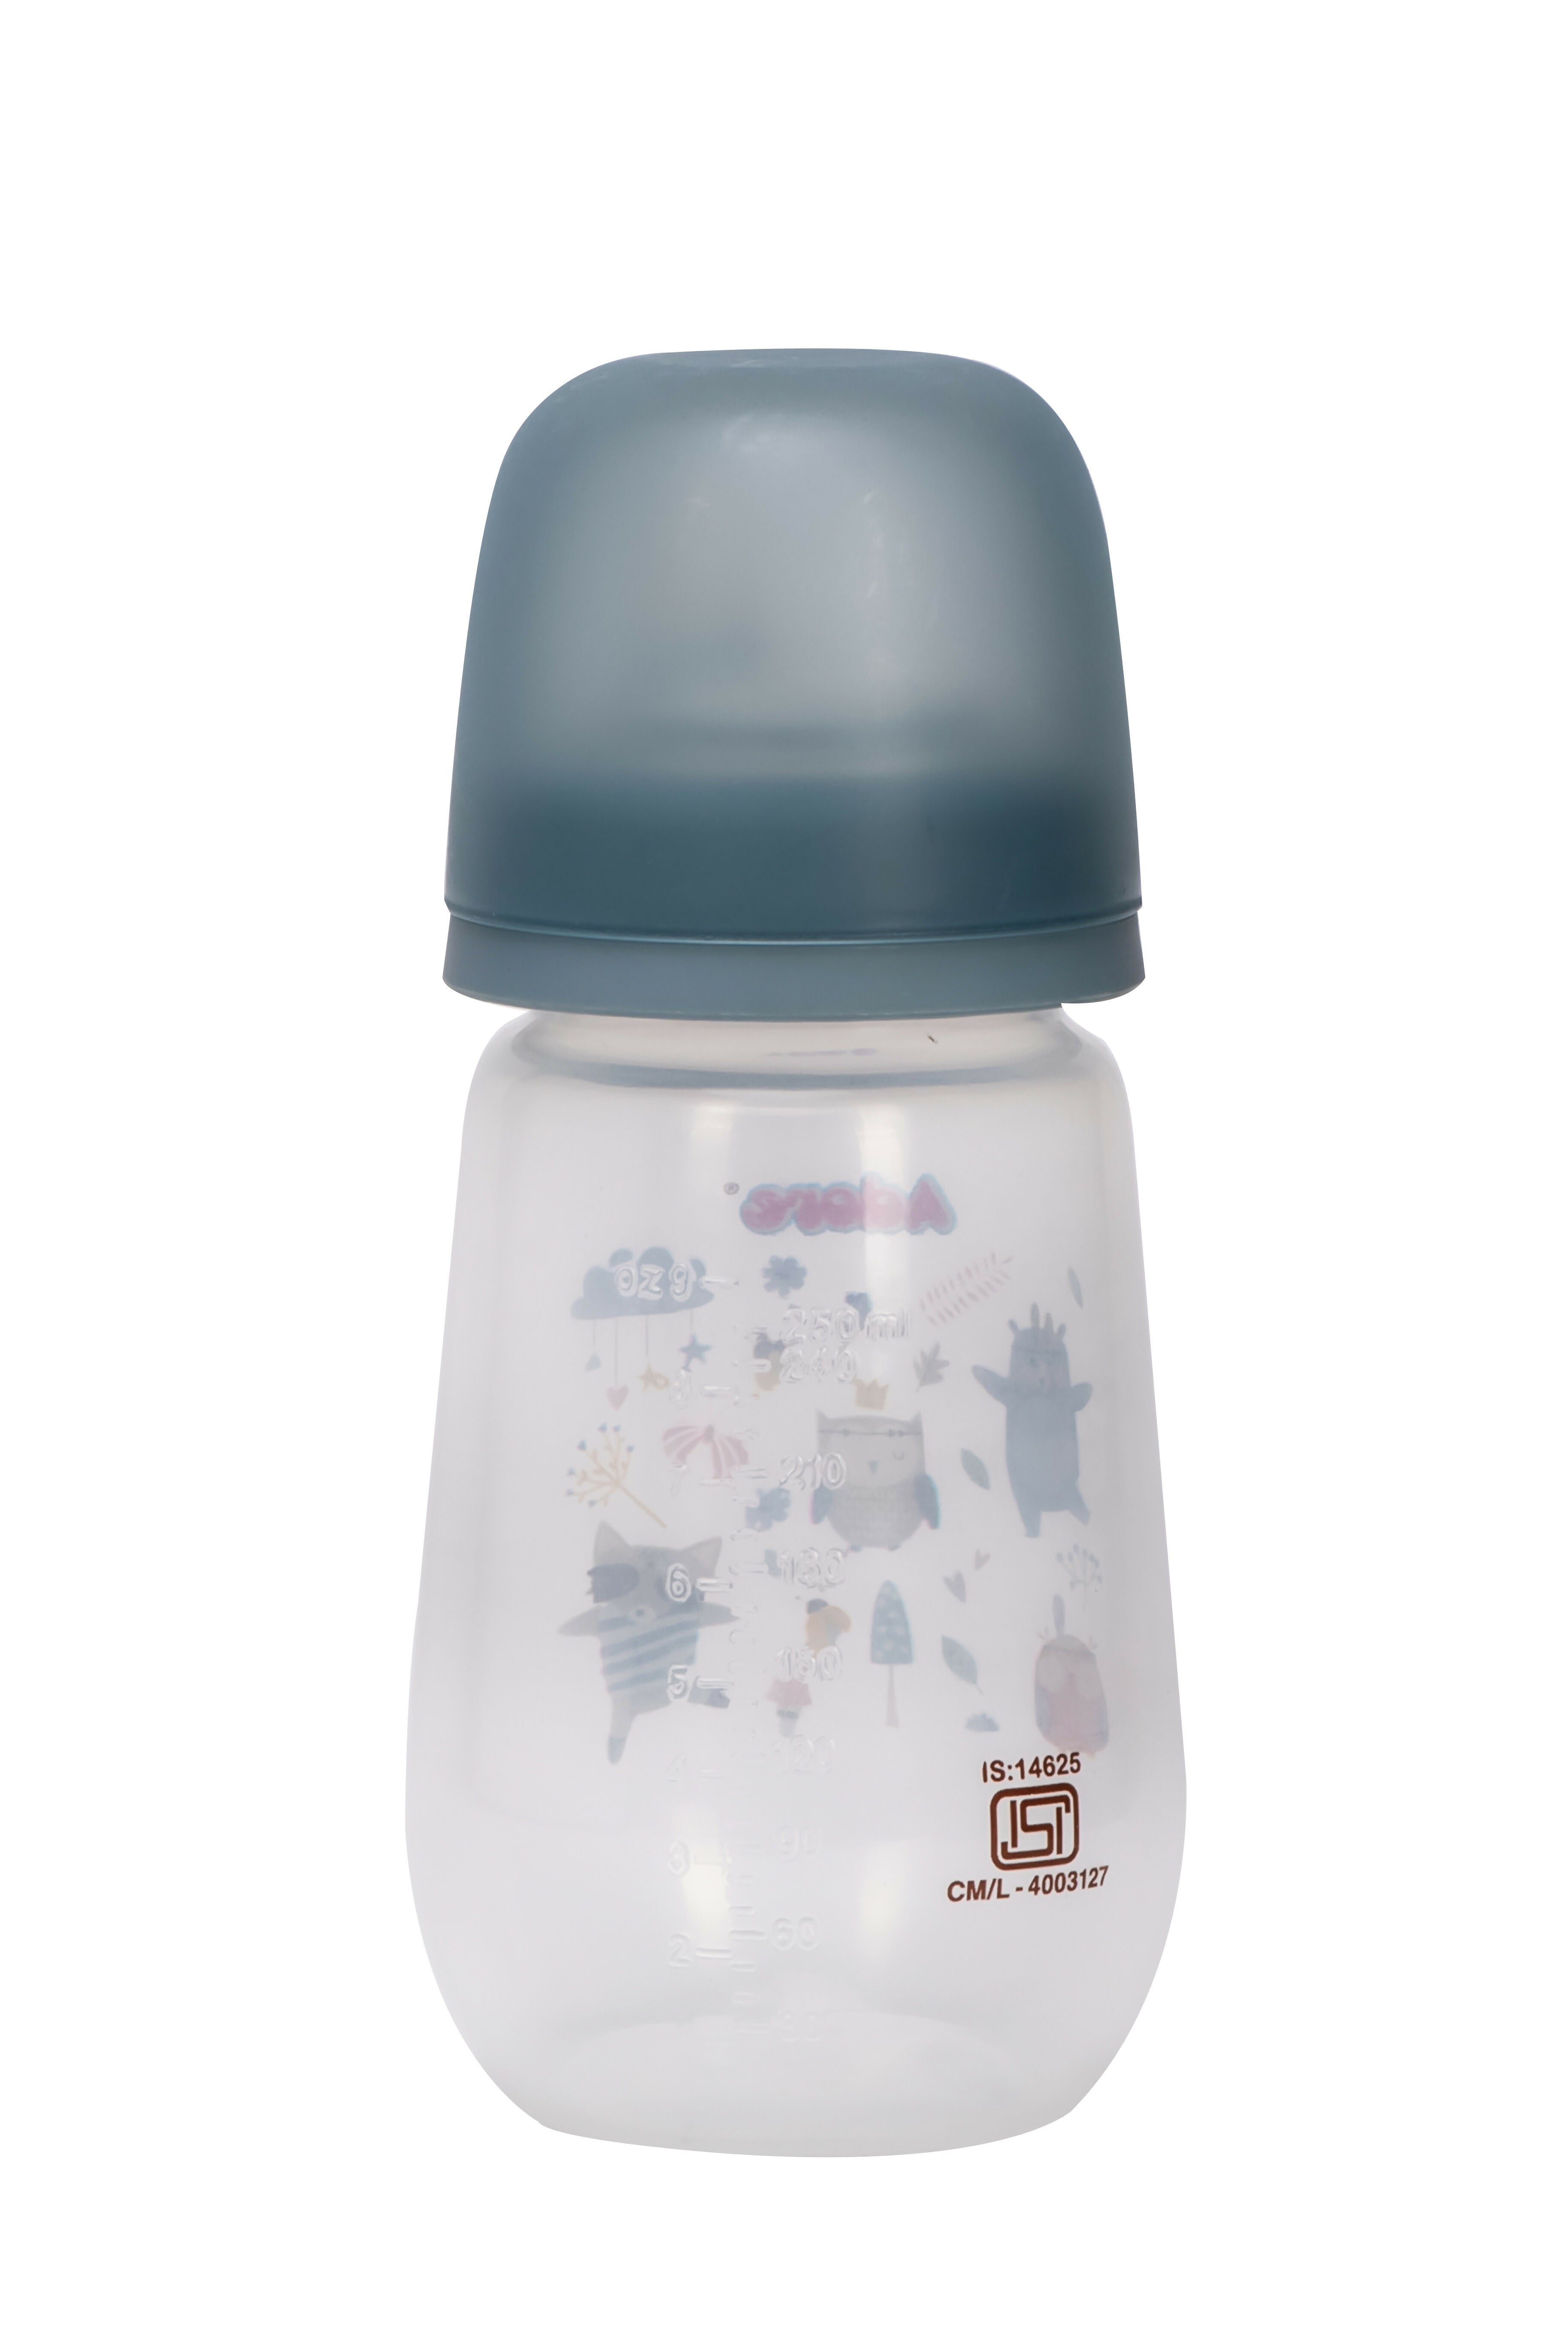 ADORE Meta Wideneck Spout Sipper- Spill Proof- 250ml - PyaraBaby